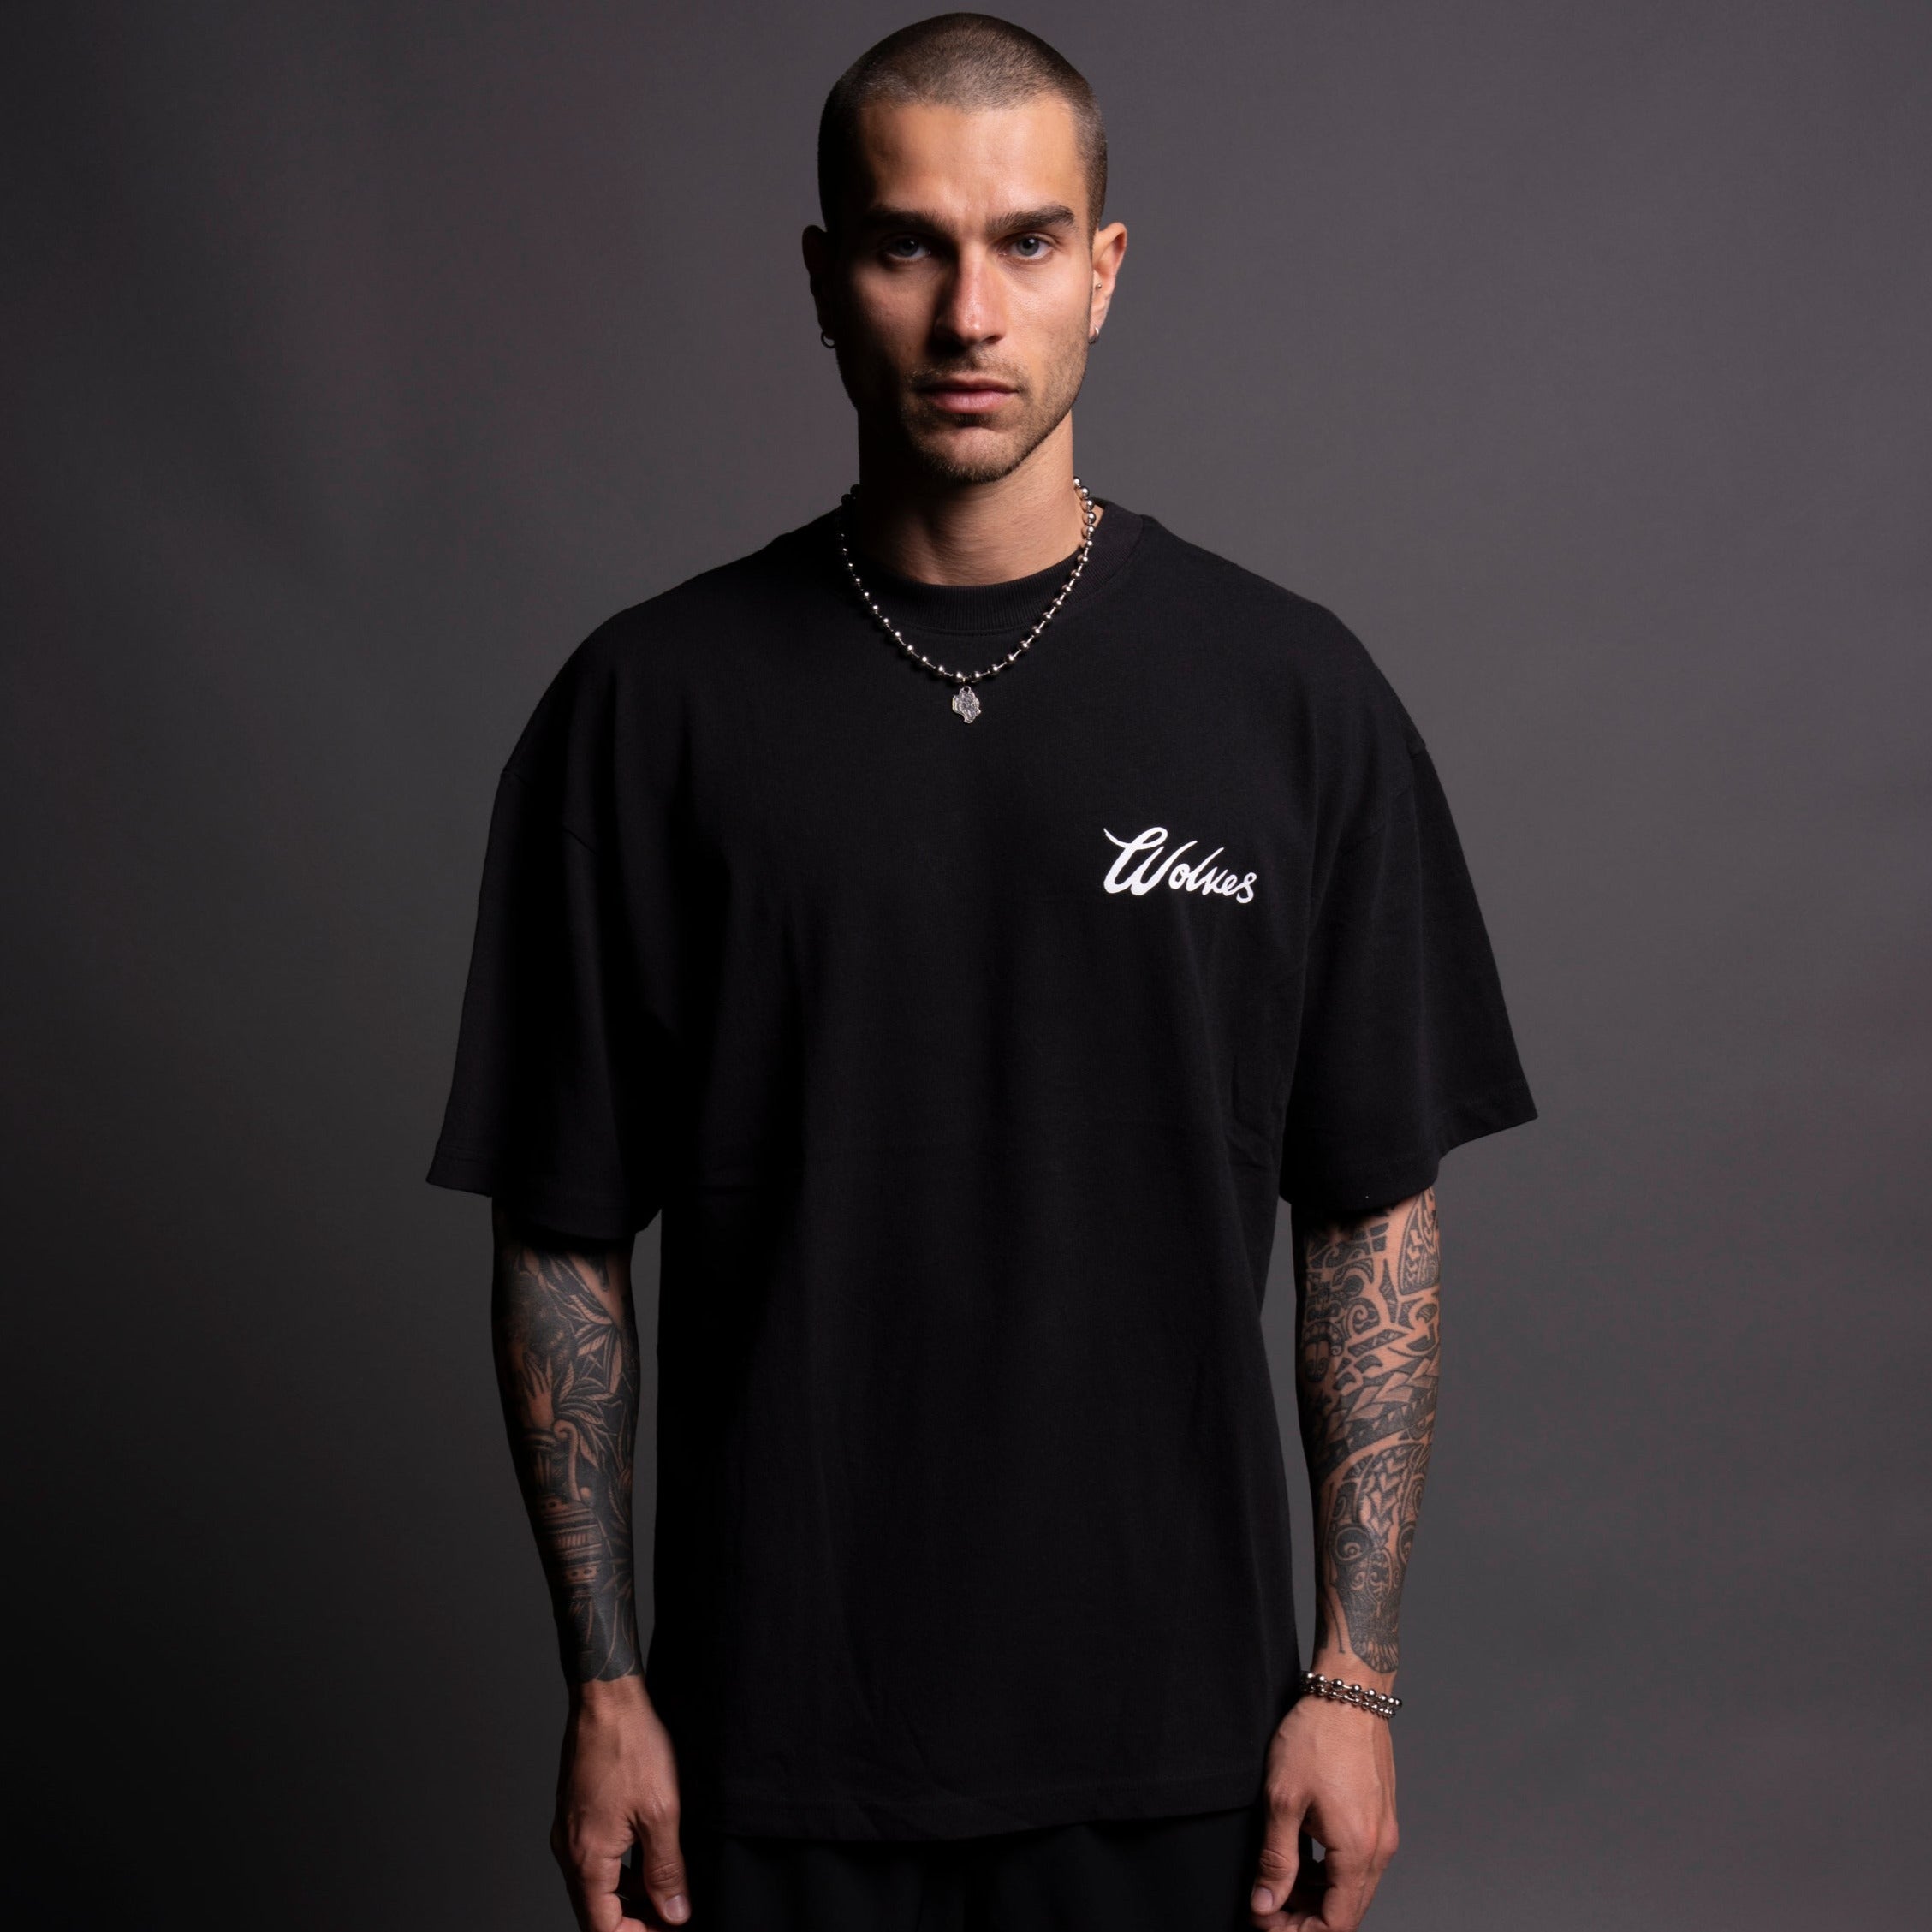 Our Tale "Premium" Oversized Tee in Black